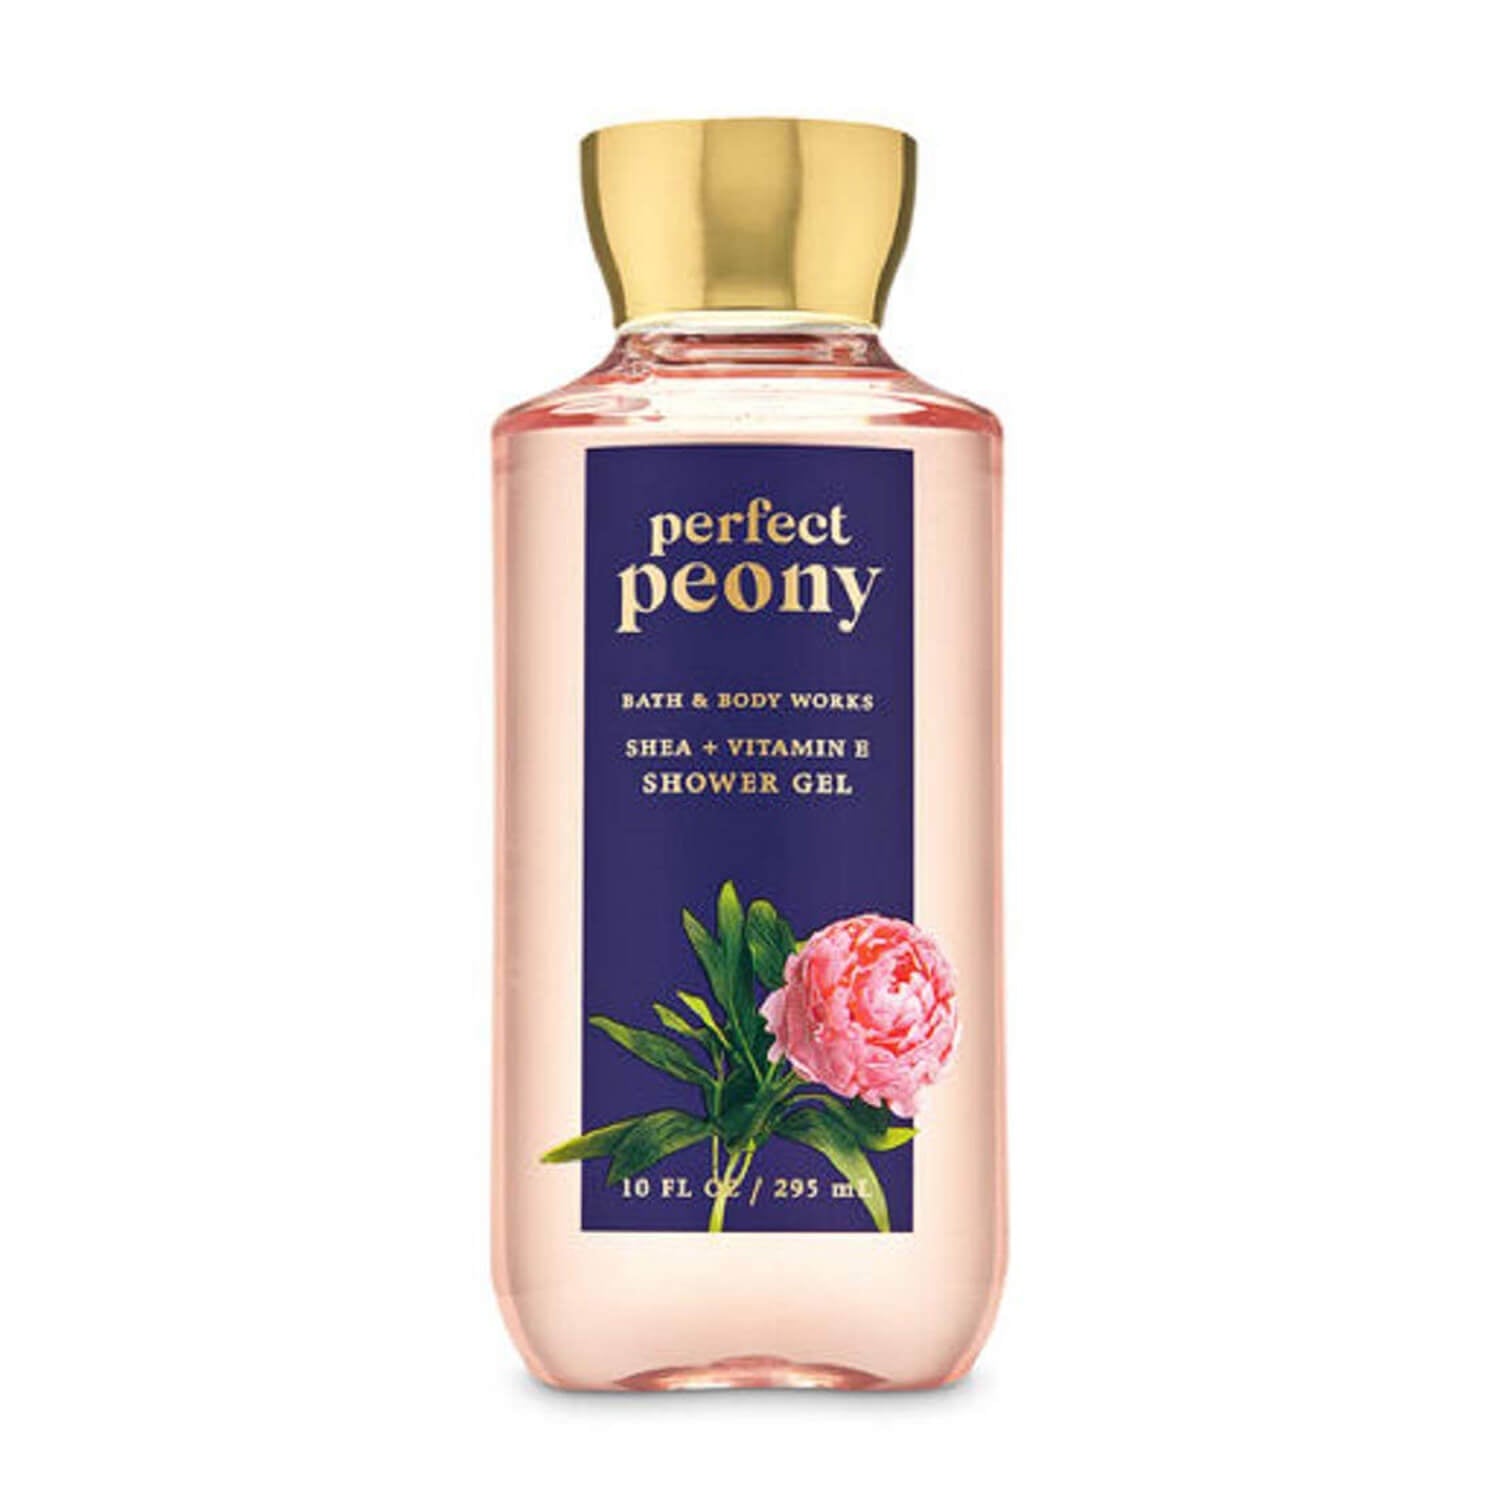 bath and body works shower gel perfect peony available at heygirl.pk for delivery in karachi lahore islamabad pakistan